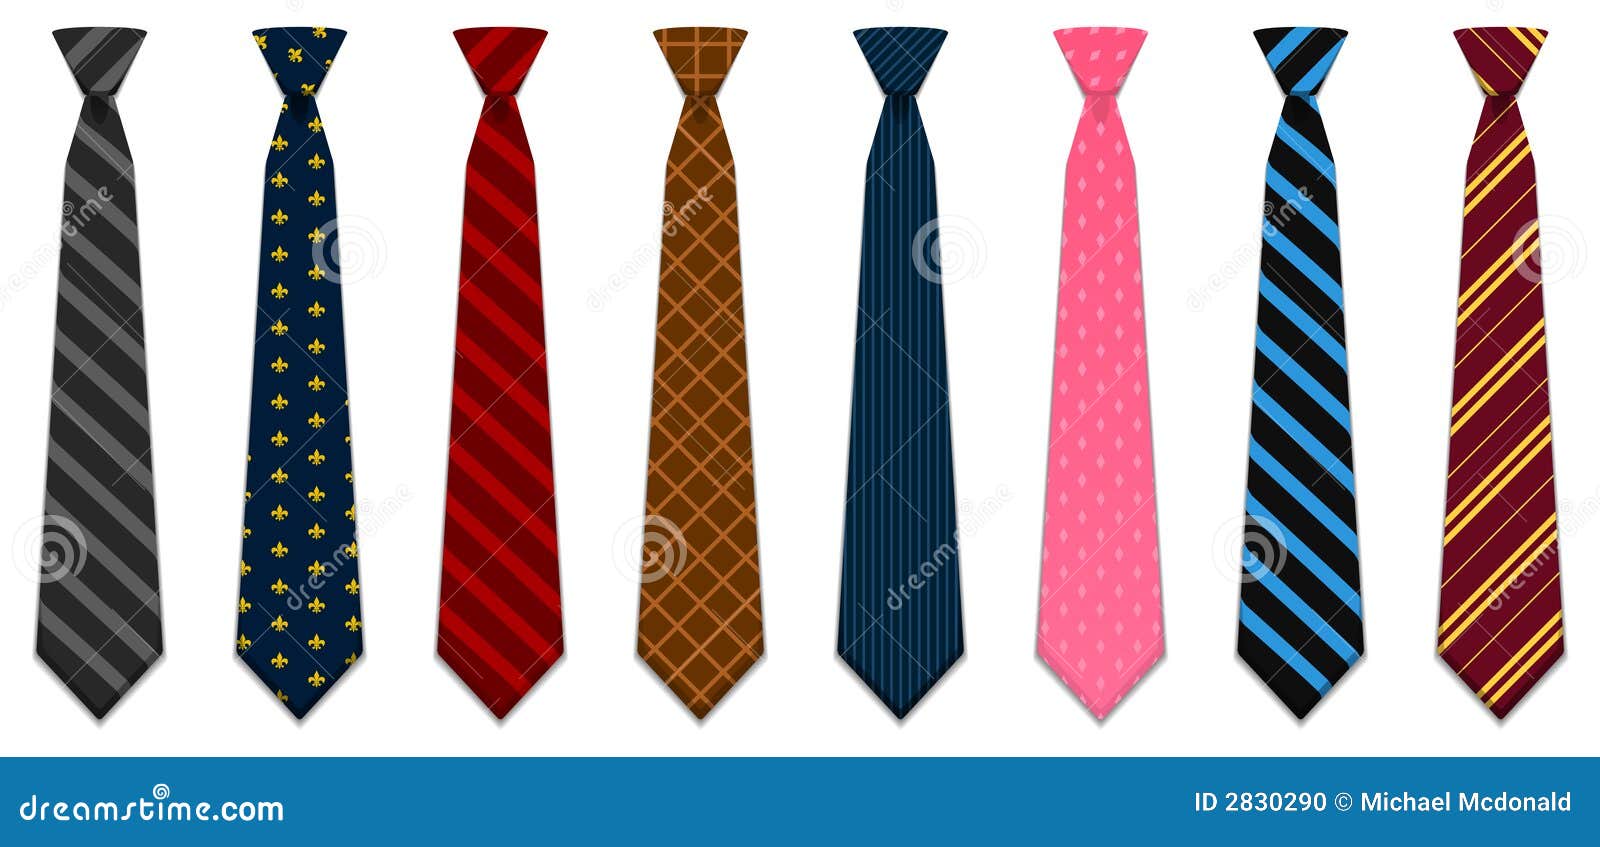 Illustrated neck ties stock vector. Illustration of potter - 2830290